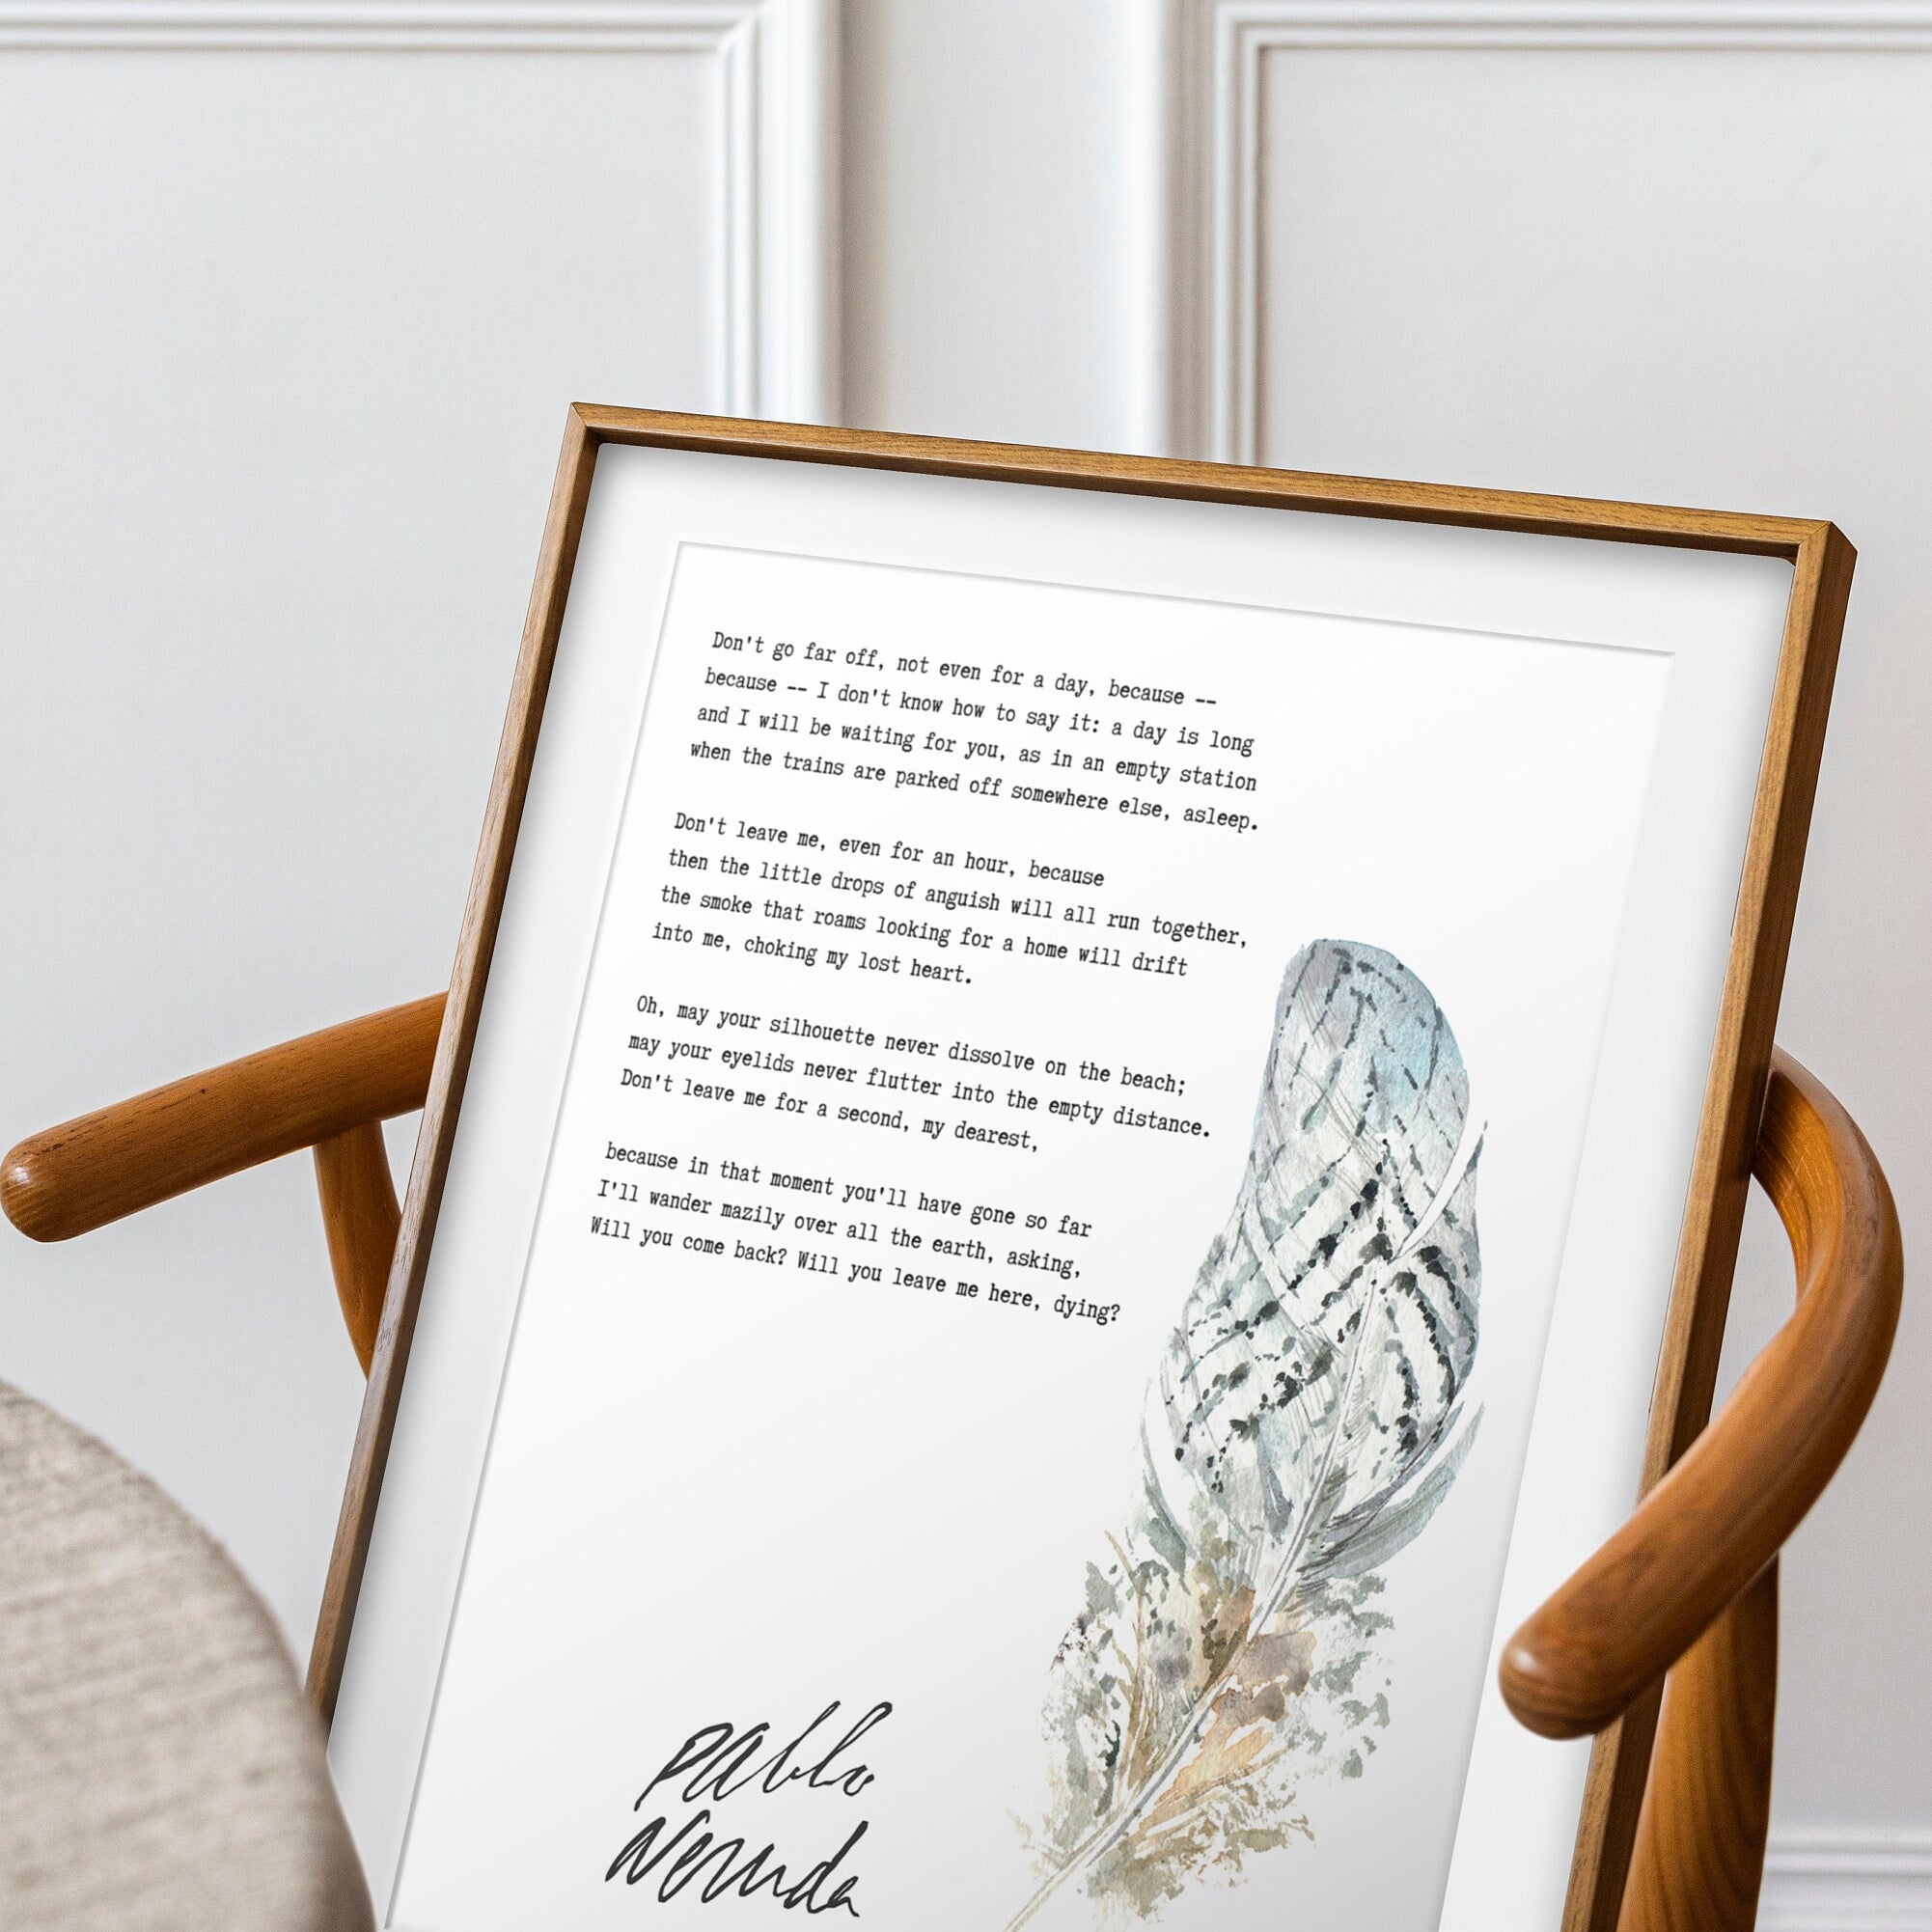 Pablo Neruda Don't go far off, not even for a day Unframed or Framed Poem Print in Black & White with Watercolour Feather Wall Art Decor